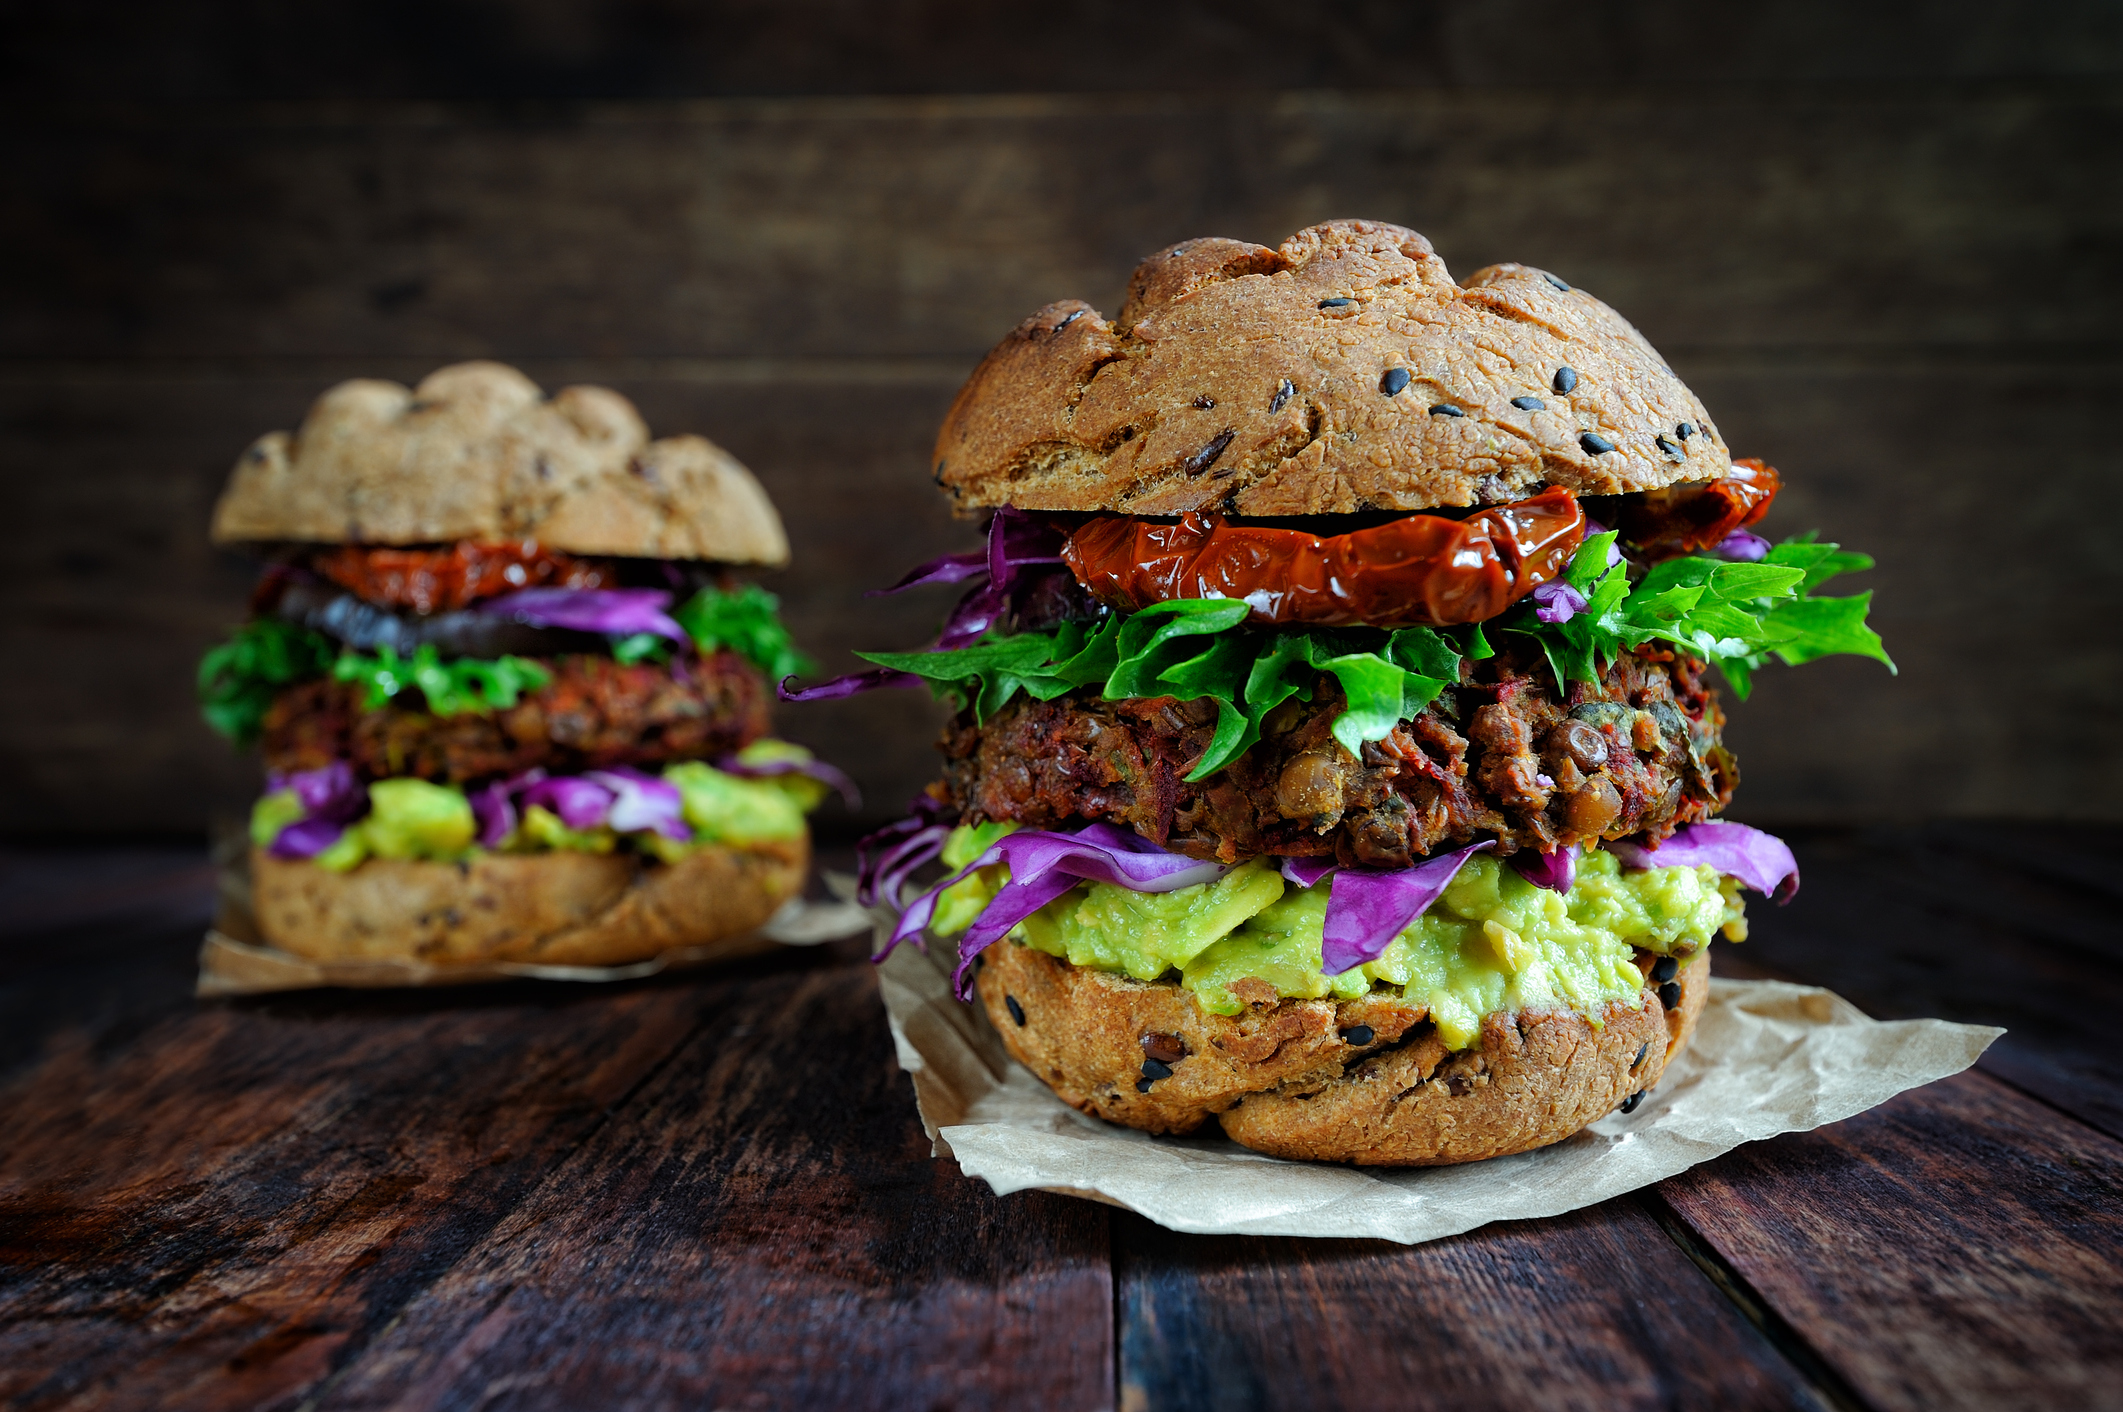 Fresh beetroot lentil vegan burger with grilled eggplant, sun-dried tomatoes and guacamole sauce